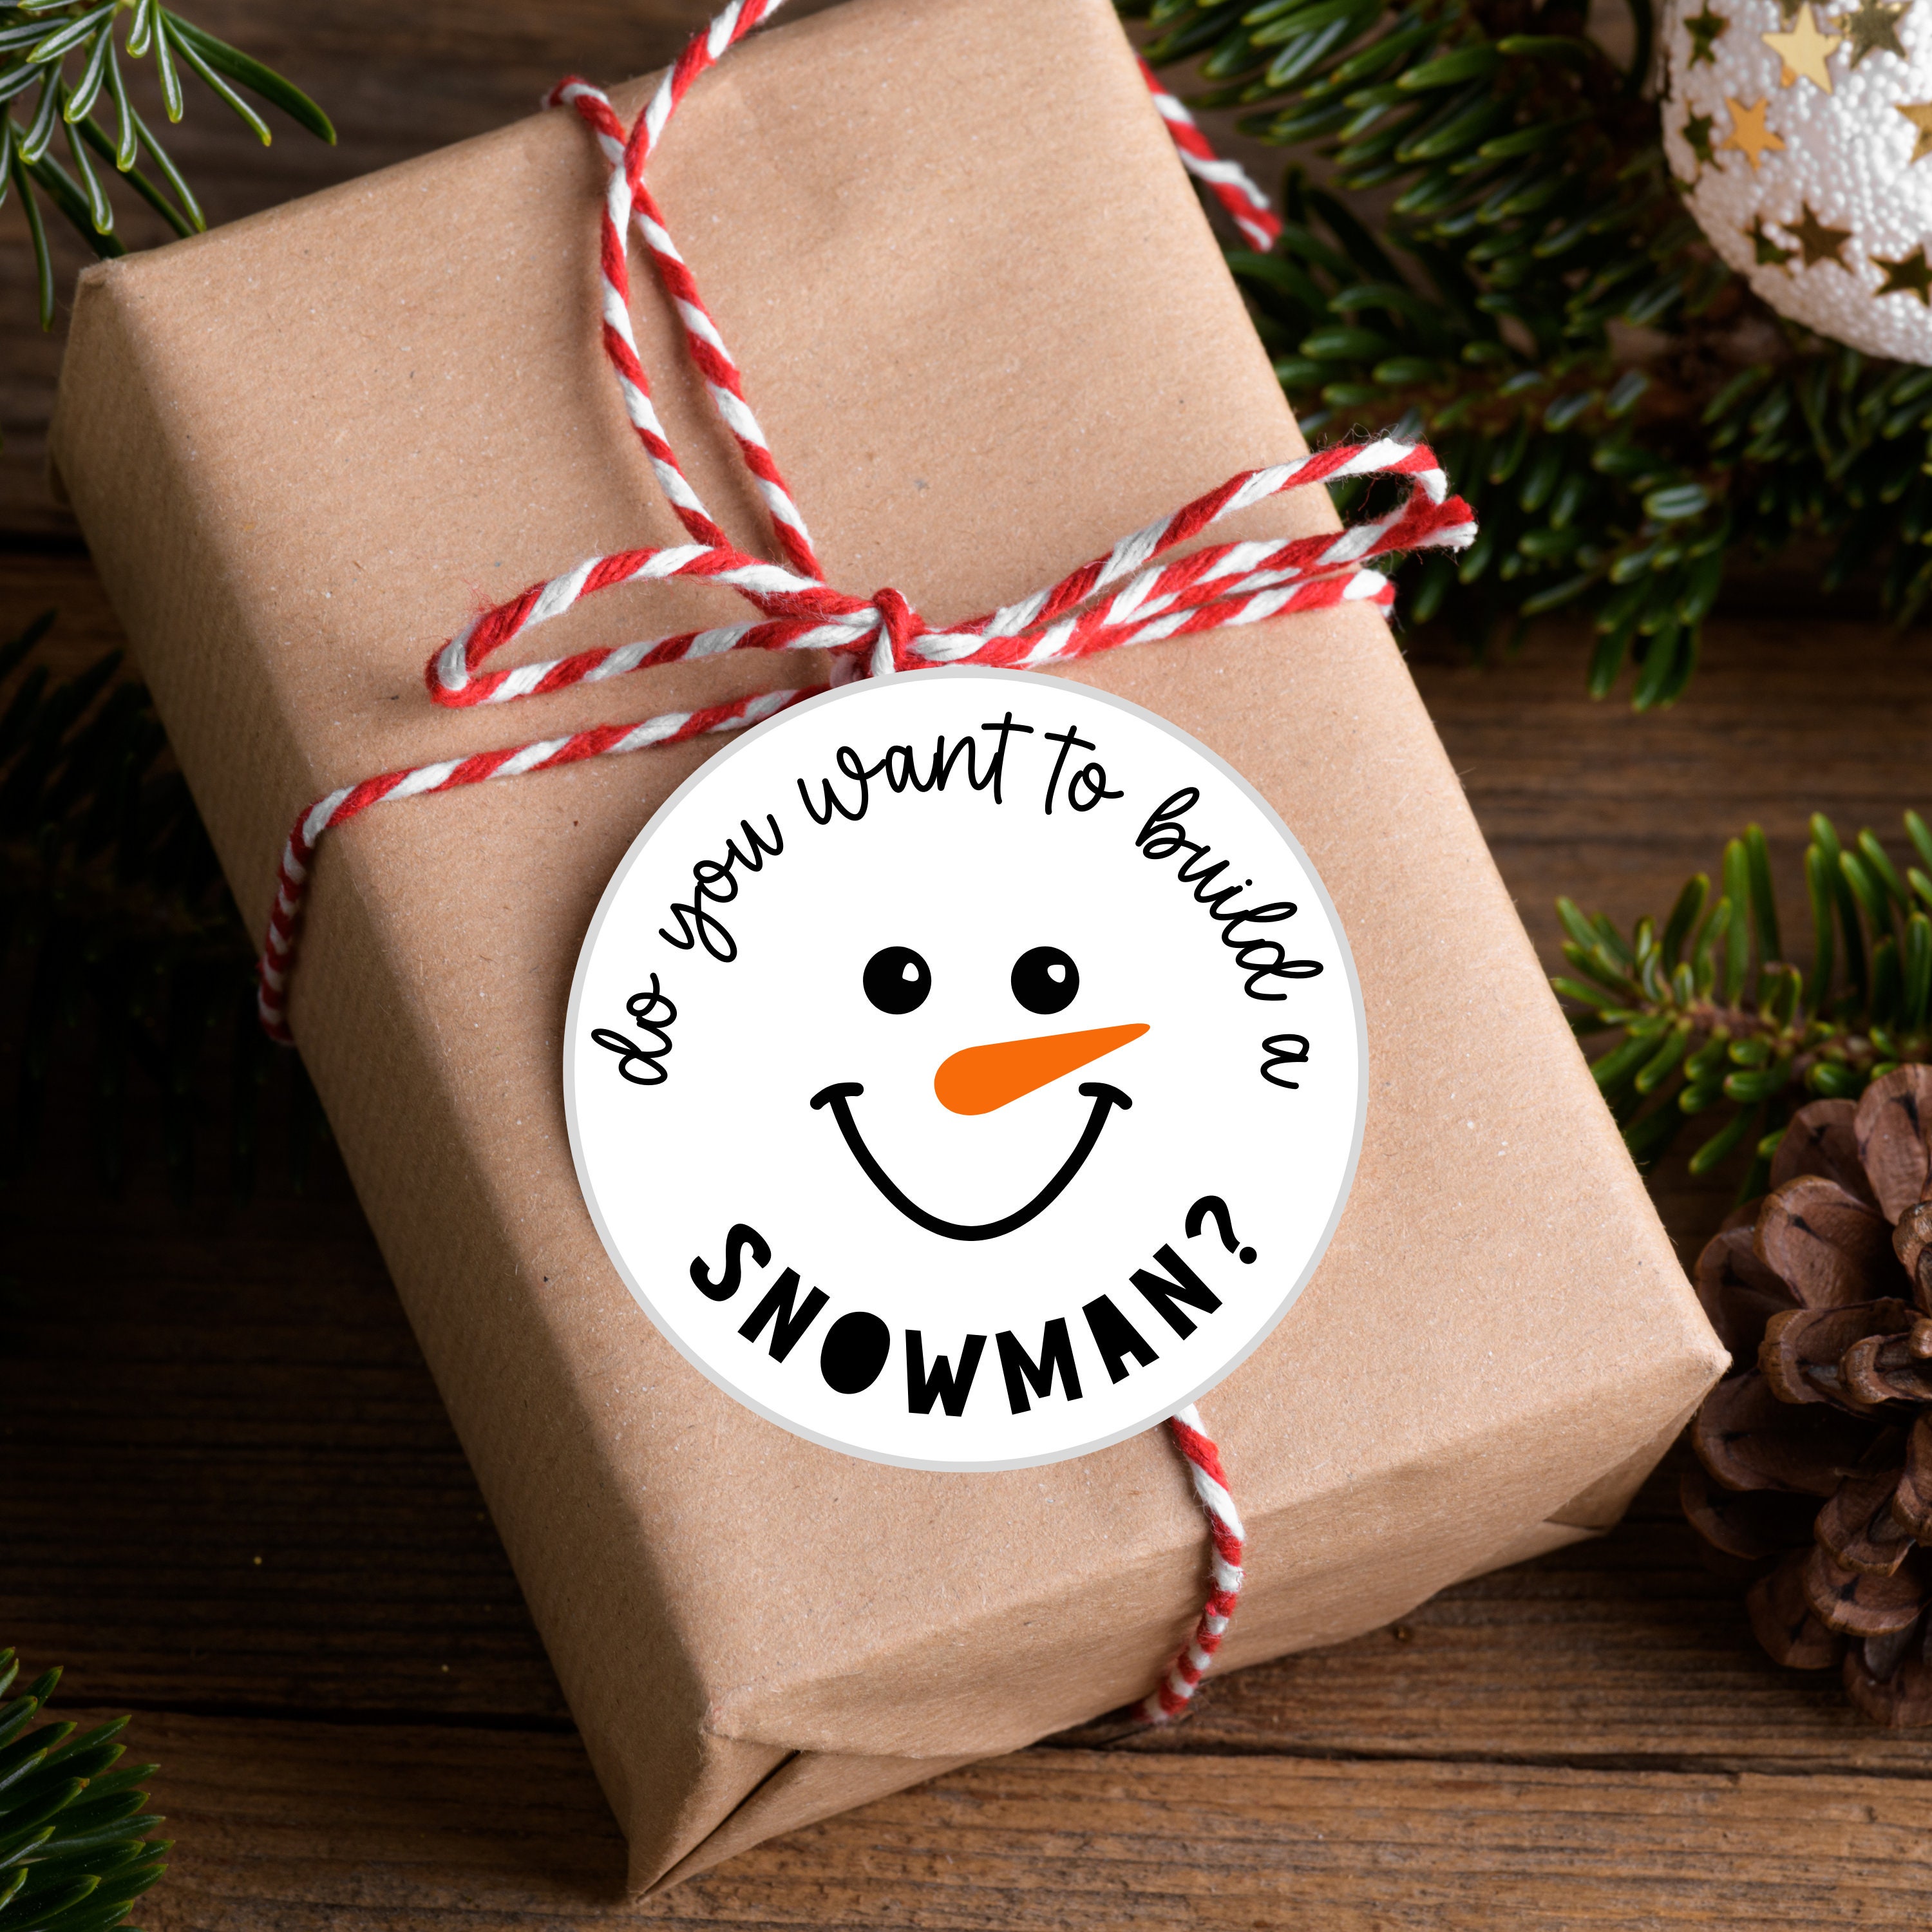 Build a Snowman Kit Treat Bag Toppers, Christmas Treat Gift Tag for Kids,  Friend Gift for Kids